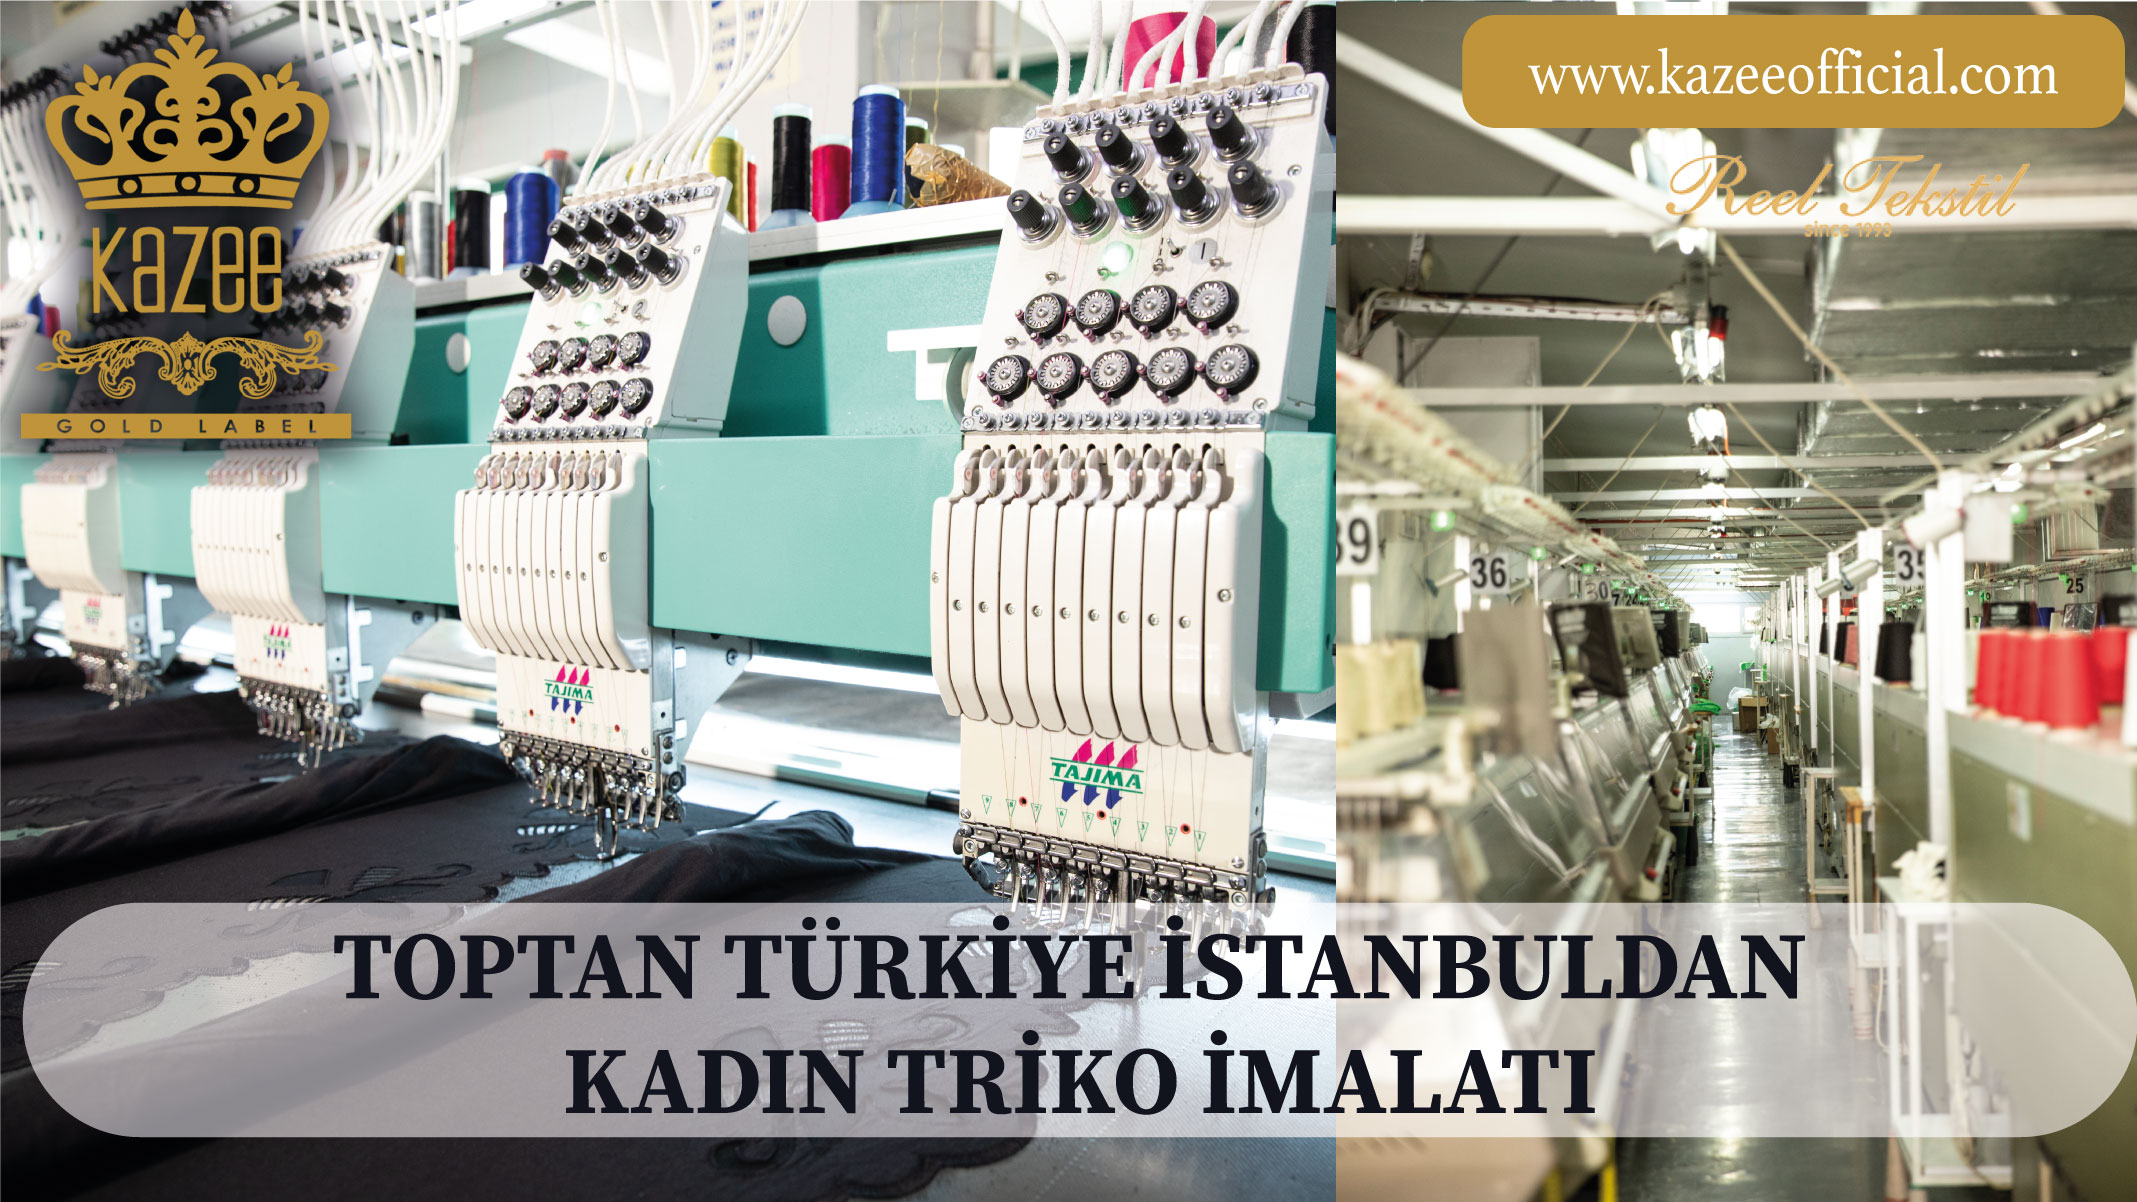 WHOLESALE TURKEY FROM ISTANBUL WOMEN'S KNITWEAR MANUFACTURING